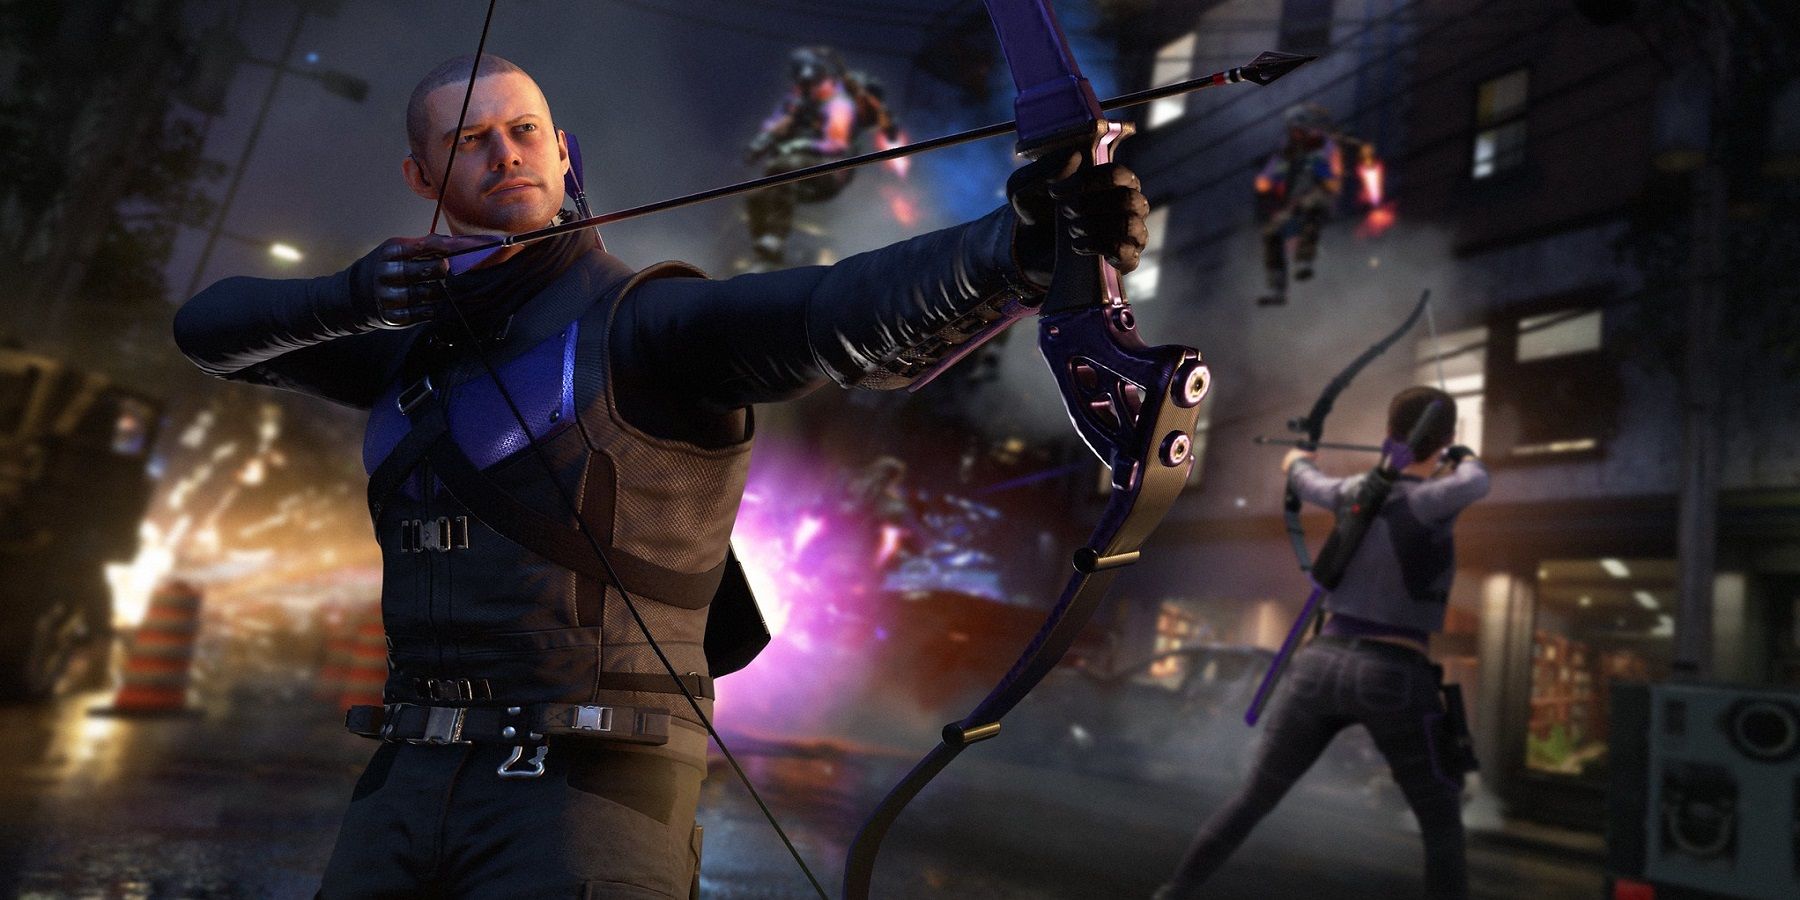 Hawkeye is getting a new skin in Marvel's Avengers from his standalone Disney Plus series.